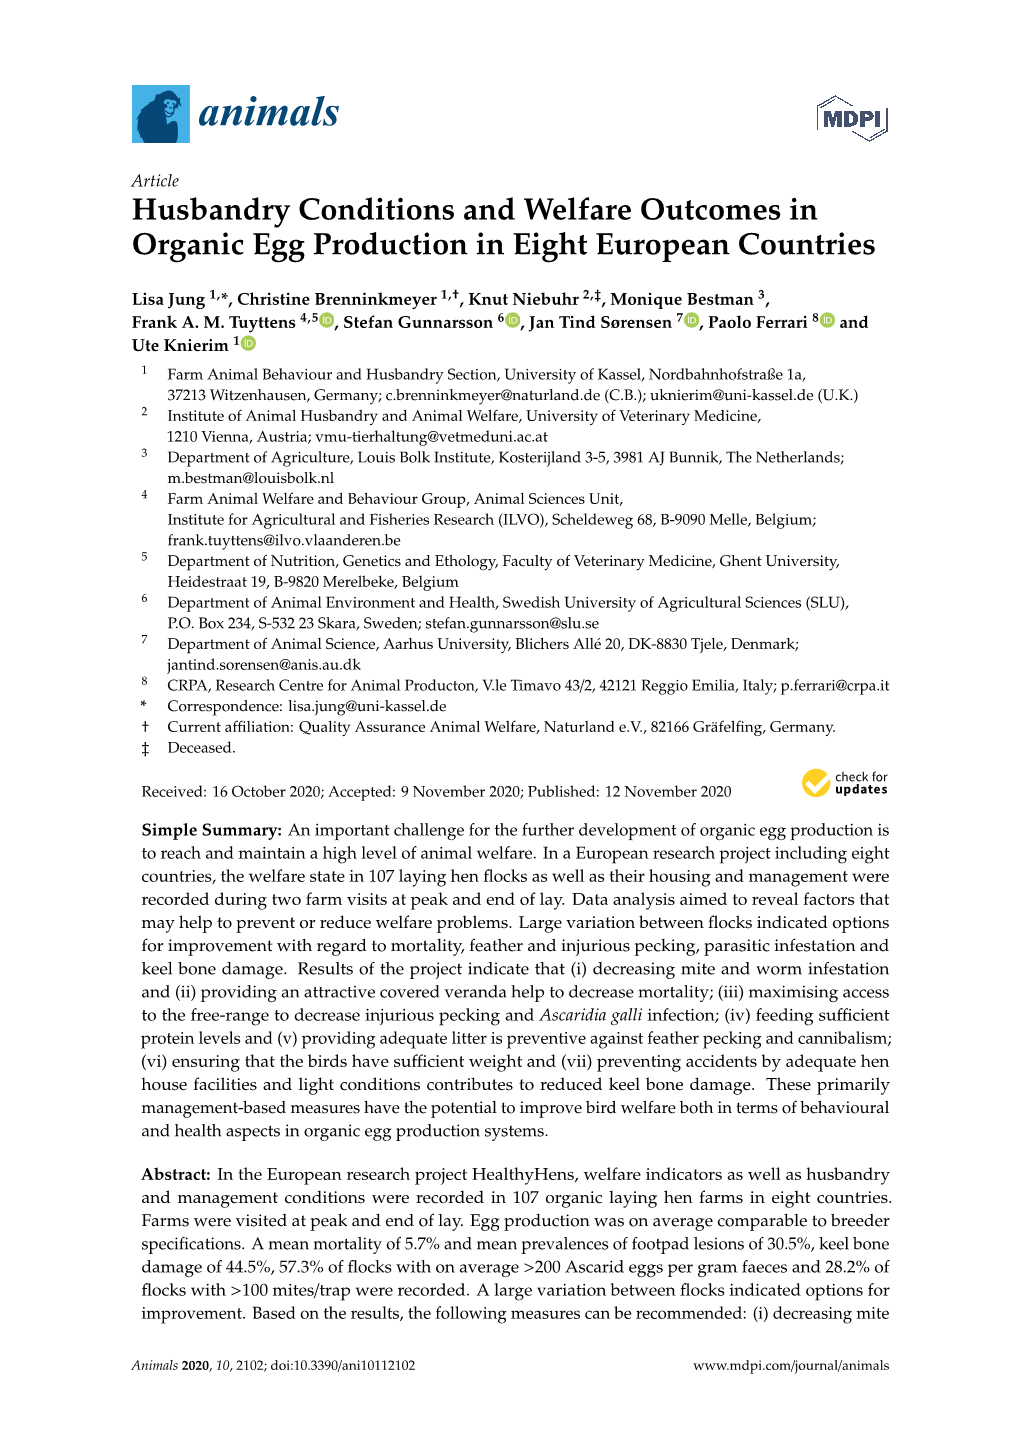 Husbandry Conditions and Welfare Outcomes in Organic Egg Production in Eight European Countries